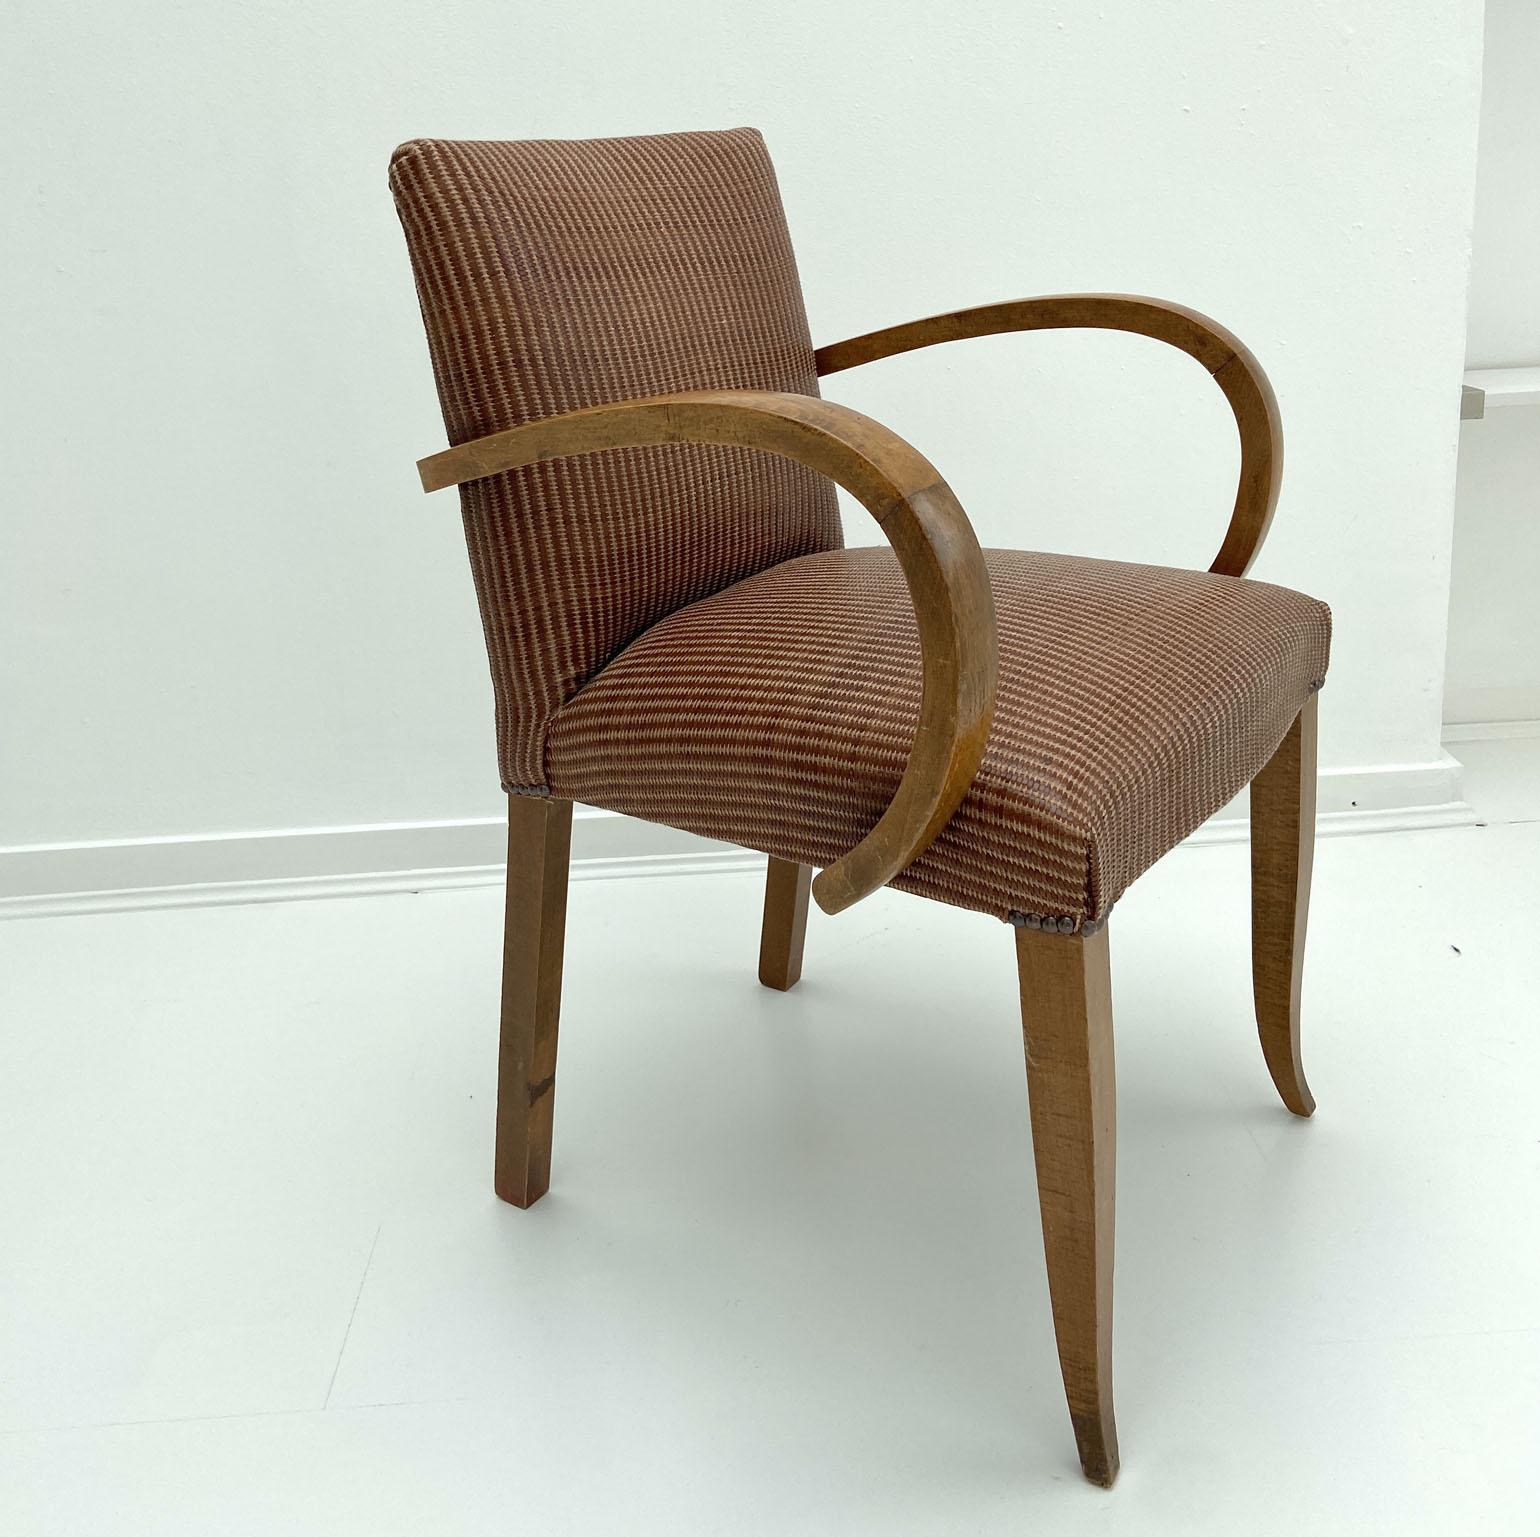 Pair of Modernist Bridge Chairs or Armchairs, French, 1930s For Sale 3